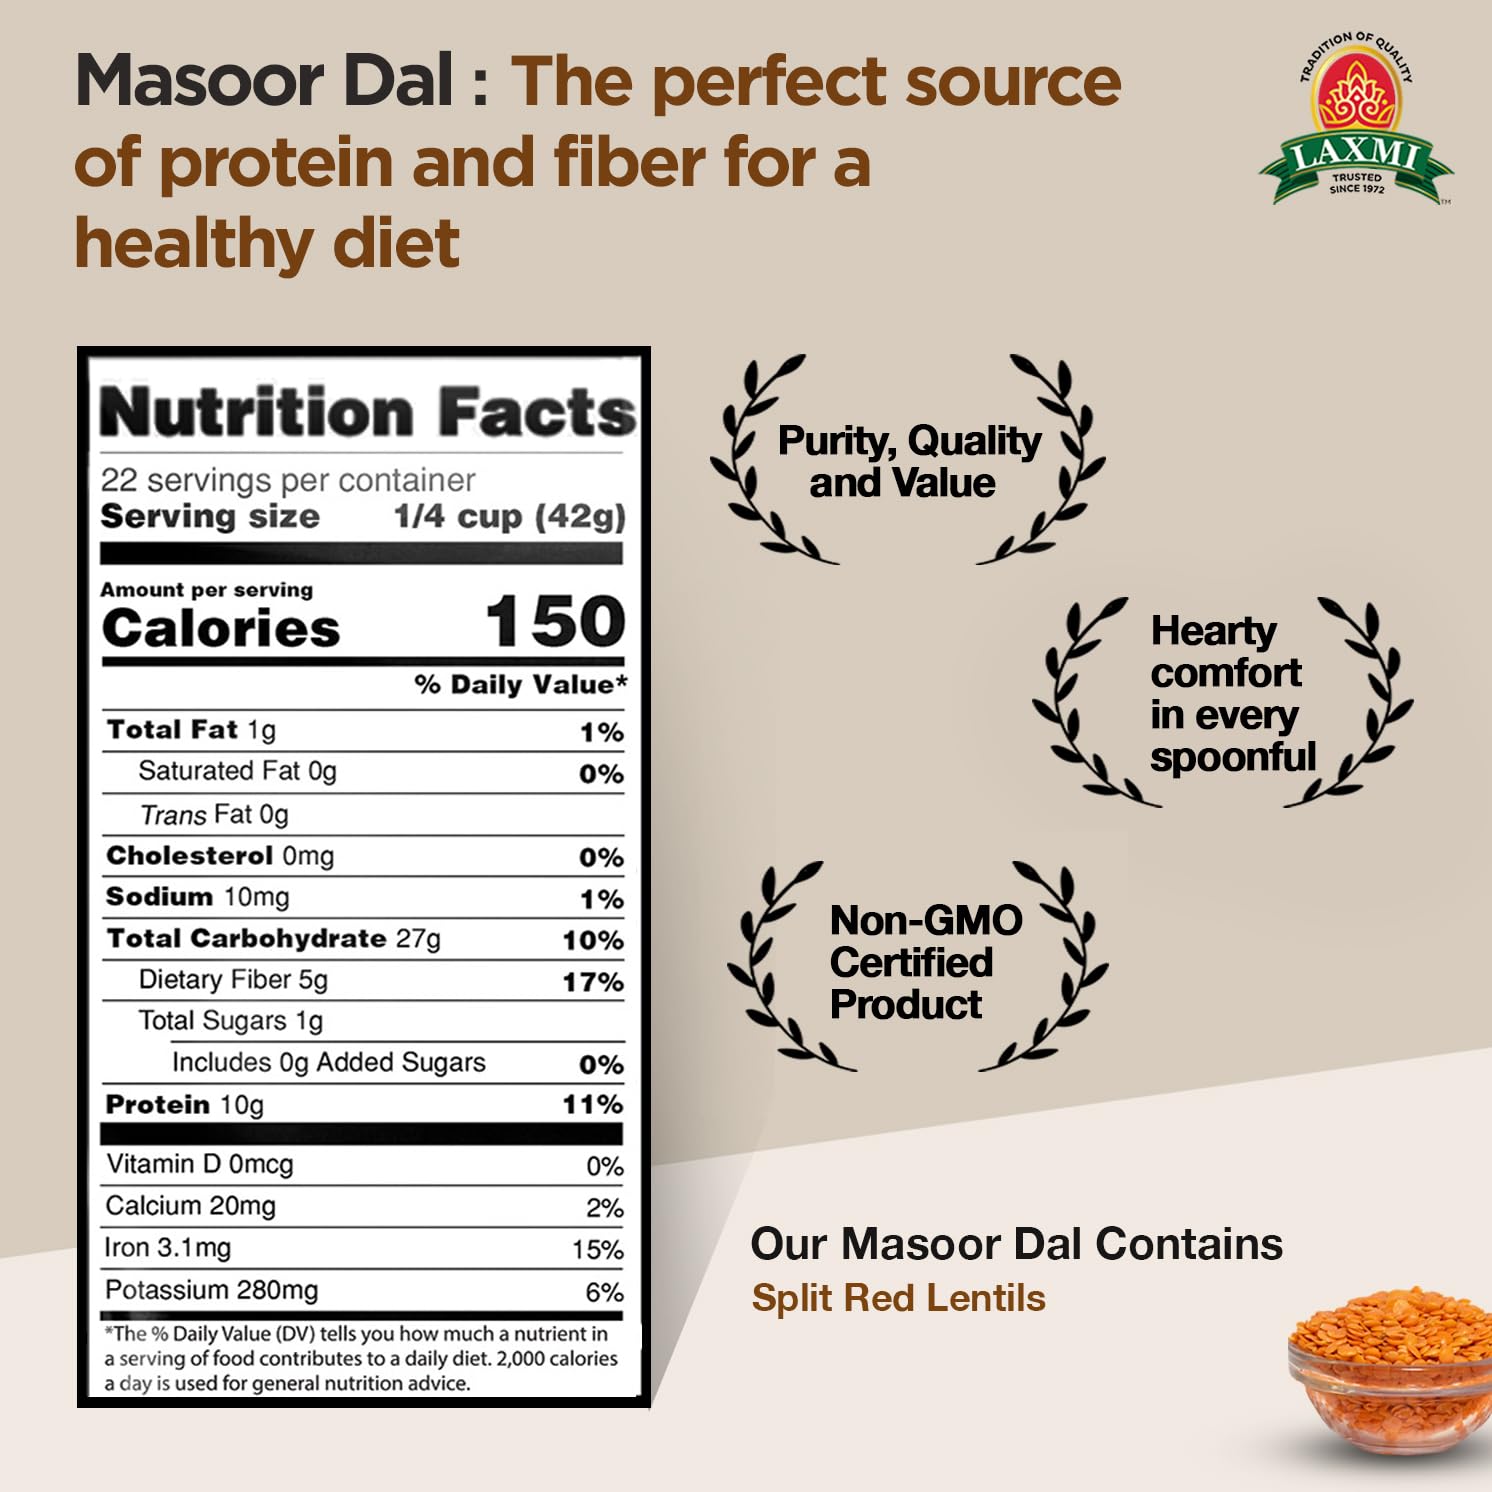 Laxmi Masoor Dal or Red Lentils, 2lbs | Pure Masoor dal lentils | Premium split red lentils | A Natural source of protein